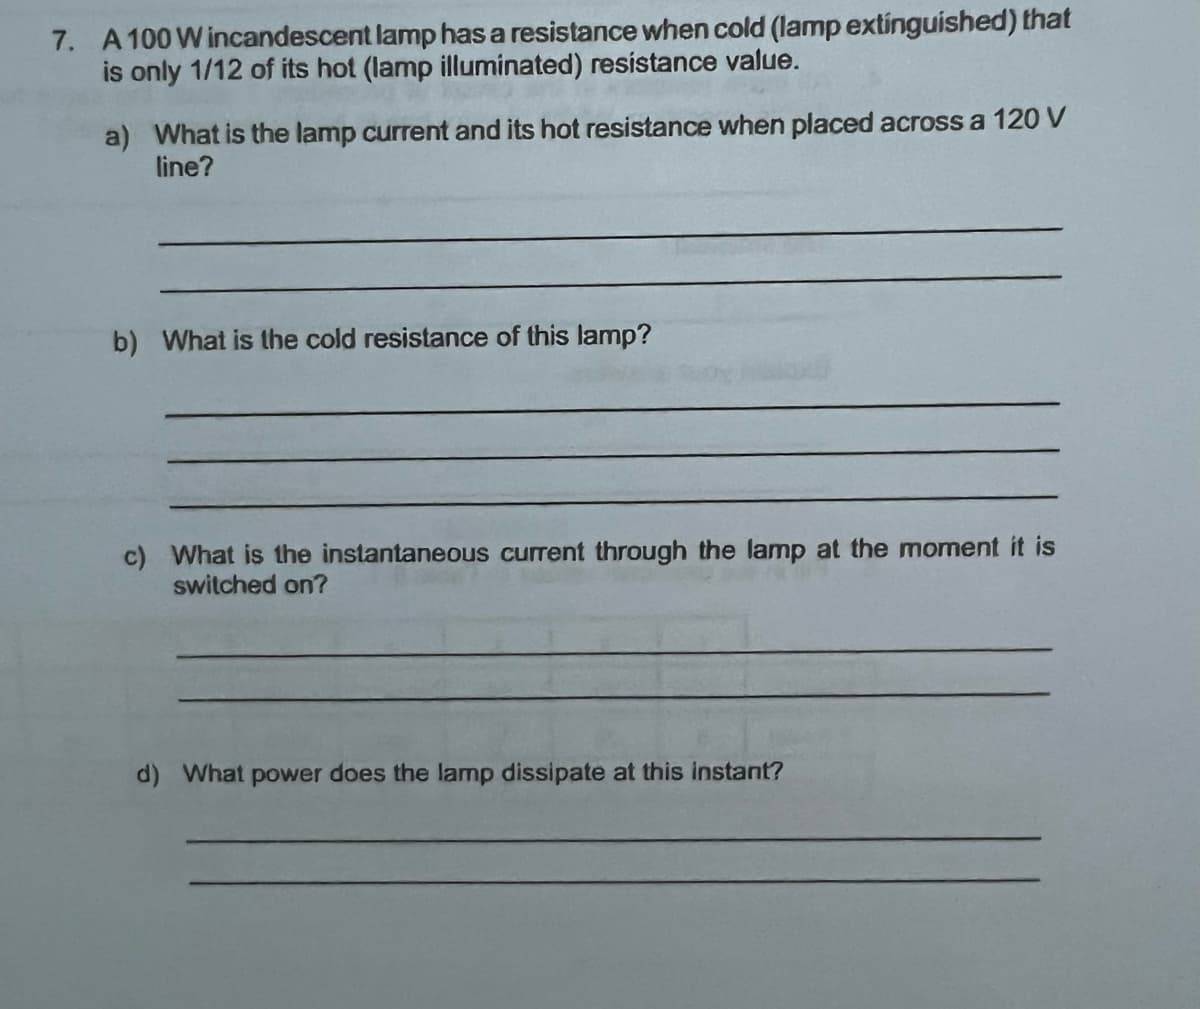 7. A 100 W incandescent lamp has a resistance when cold (lamp extinguished) that
is only 1/12 of its hot (lamp illuminated) resistance value.
a) What is the lamp current and its hot resistance when placed across a 120 V
line?
b) What is the cold resistance of this lamp?
c) What is the instantaneous current through the lamp at the moment it is
switched on?
d) What power does the lamp dissipate at this instant?